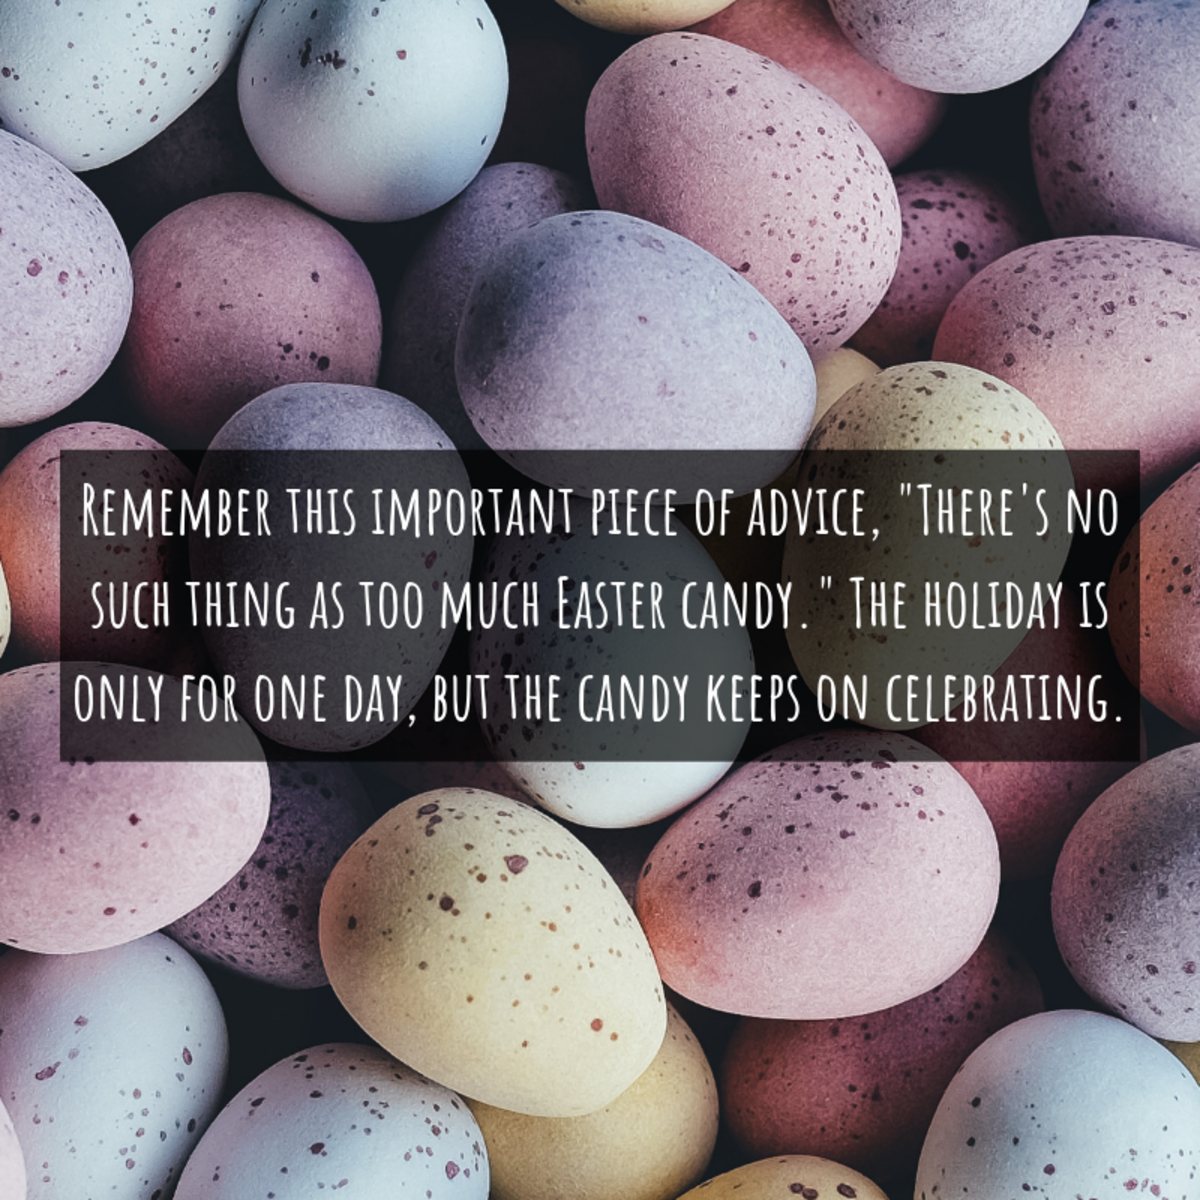 Easter is a great time to remind friends, family, and acquaintances how important they are to you.